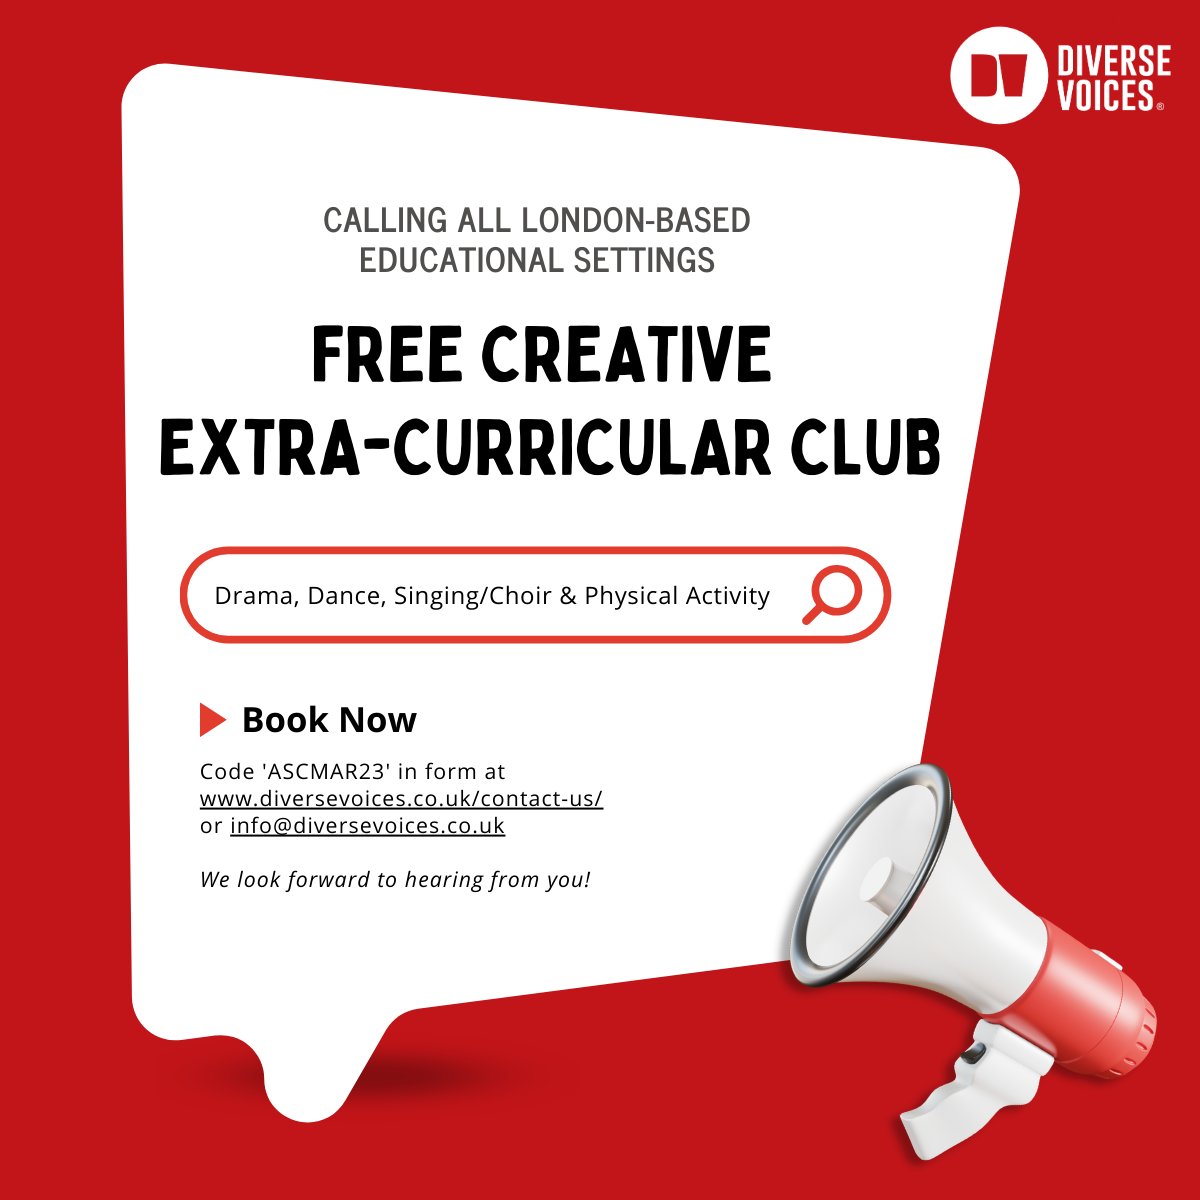 🚨Calling London-based Educational Settings!🚨 @DiverseVoices is offering you a *free* extracurricular club!

⭐️Drama, Dance, Singing/Choir & Physical Activity⭐️

Looking forward to hearing from you! RT #schools #extracurricular #londonschools #schoolleaders #ukedchat #edutwitter